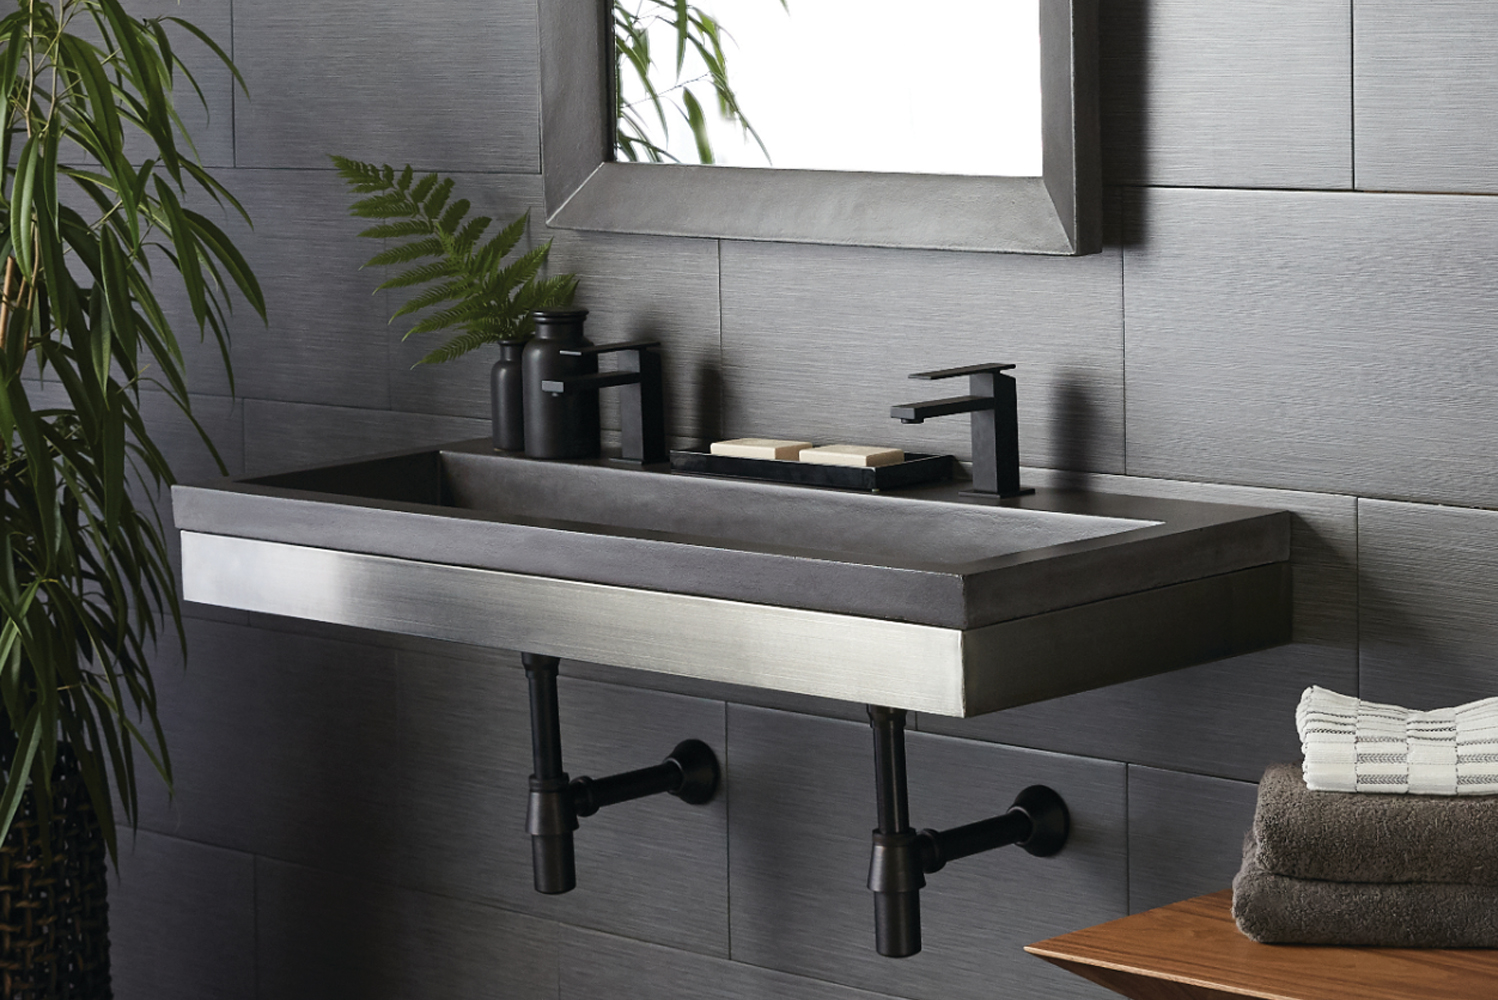 Introducing Zaca wall mount the latest bathroom vanity from kitchen and bath manufacturer Native Trails